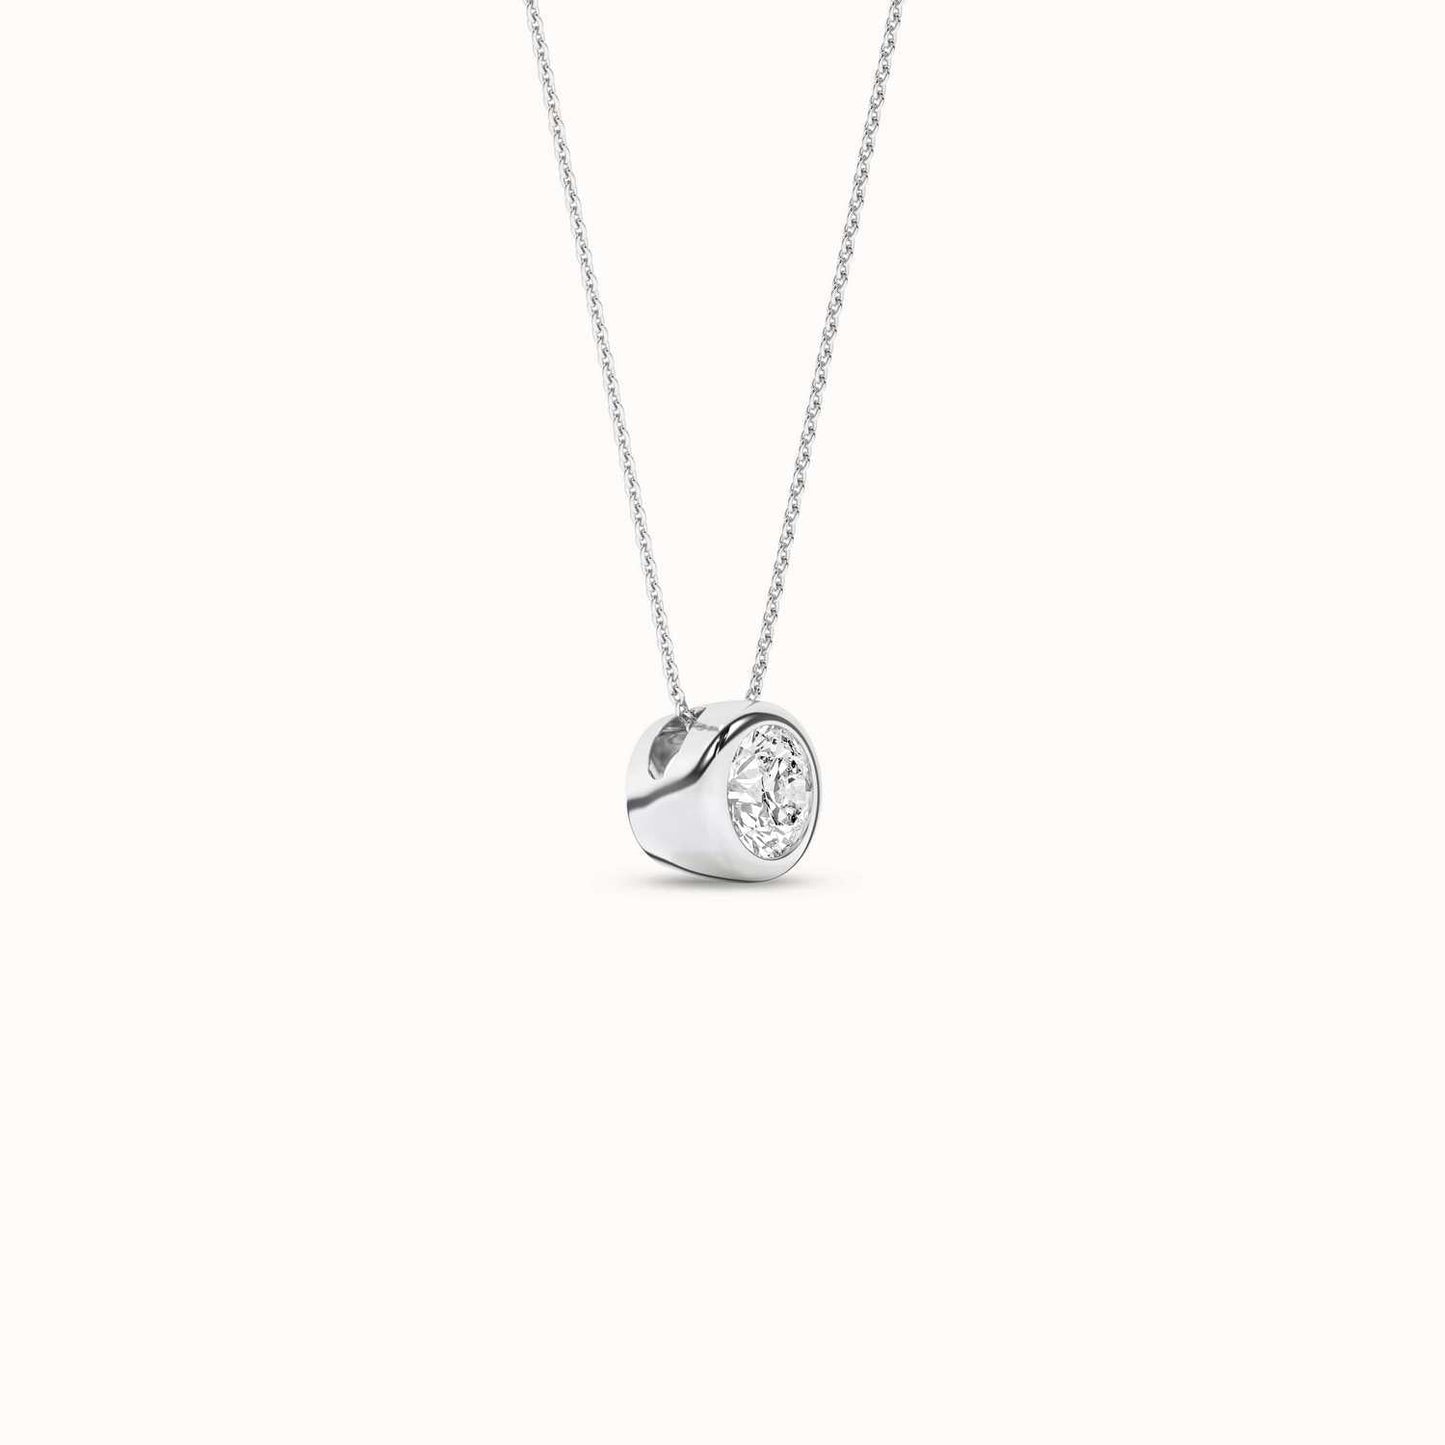 Encompassing Round Necklace_Product Angle_1/3Ct. - 2